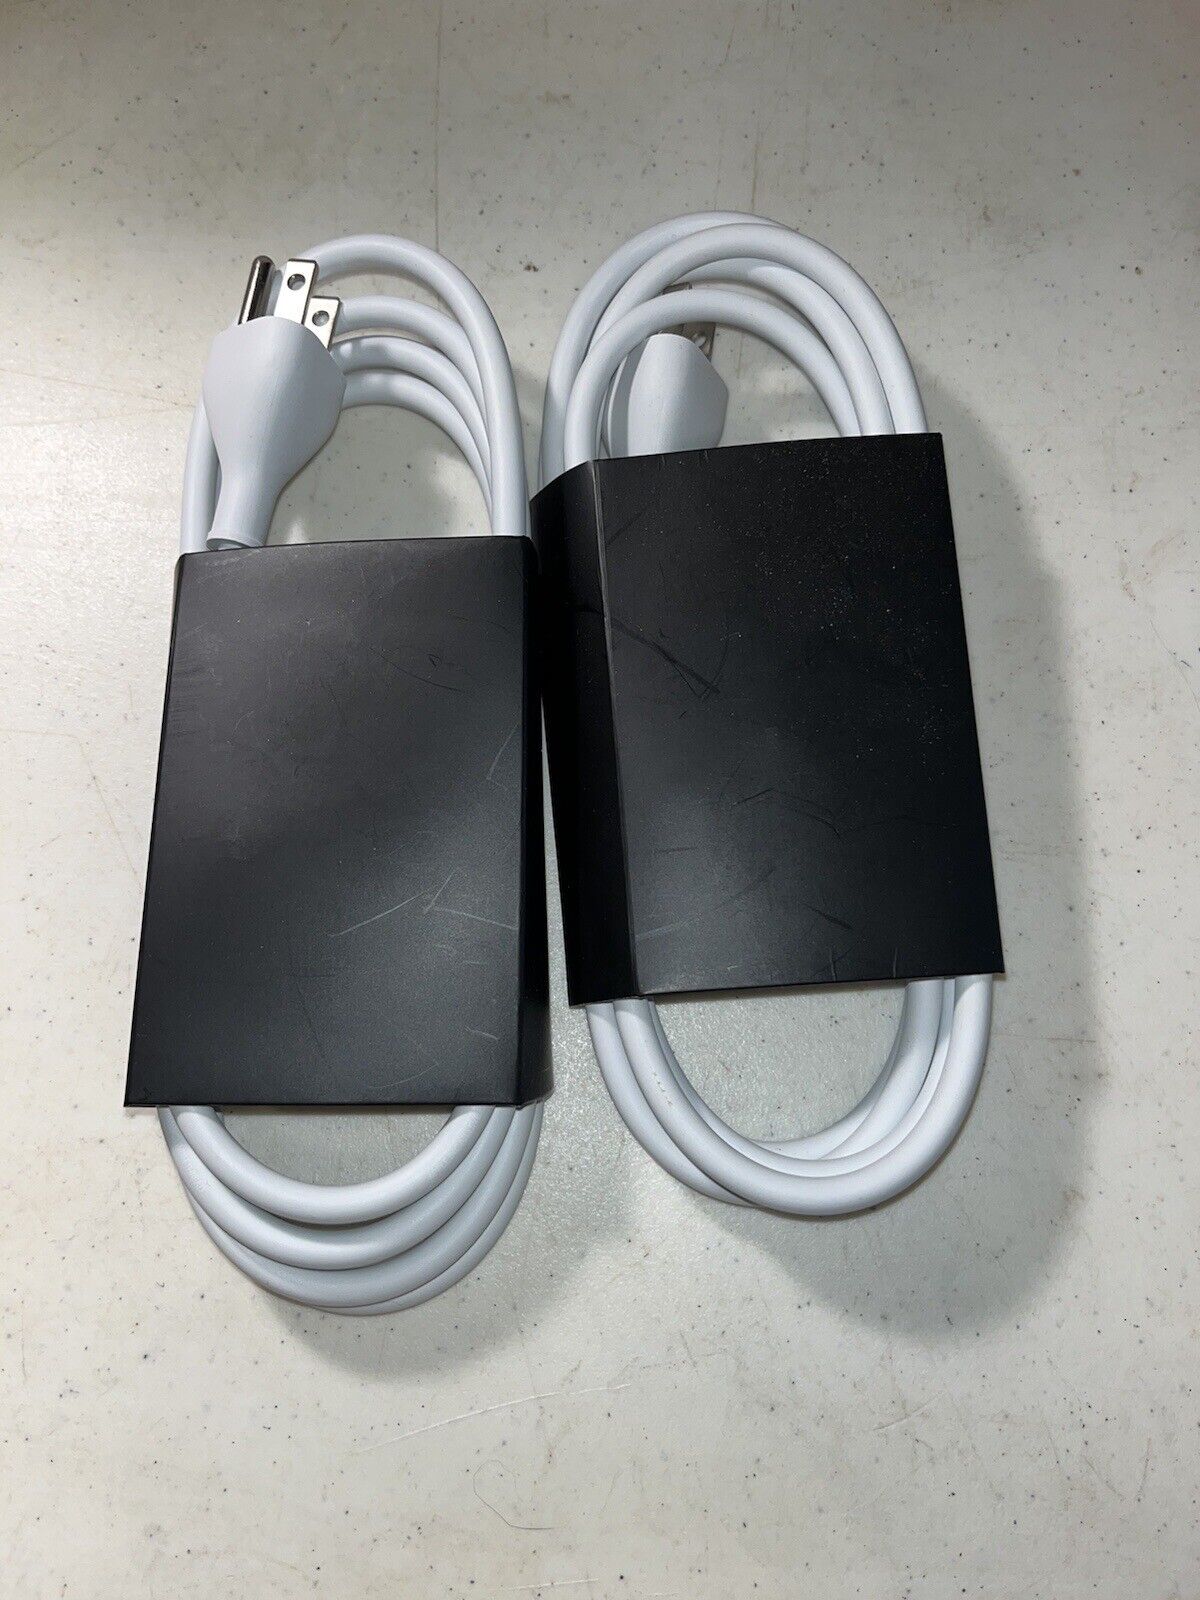 Pair of Brand New APPLE 2.5A/125V Power Cords Each 6ft Long 01-622-00003